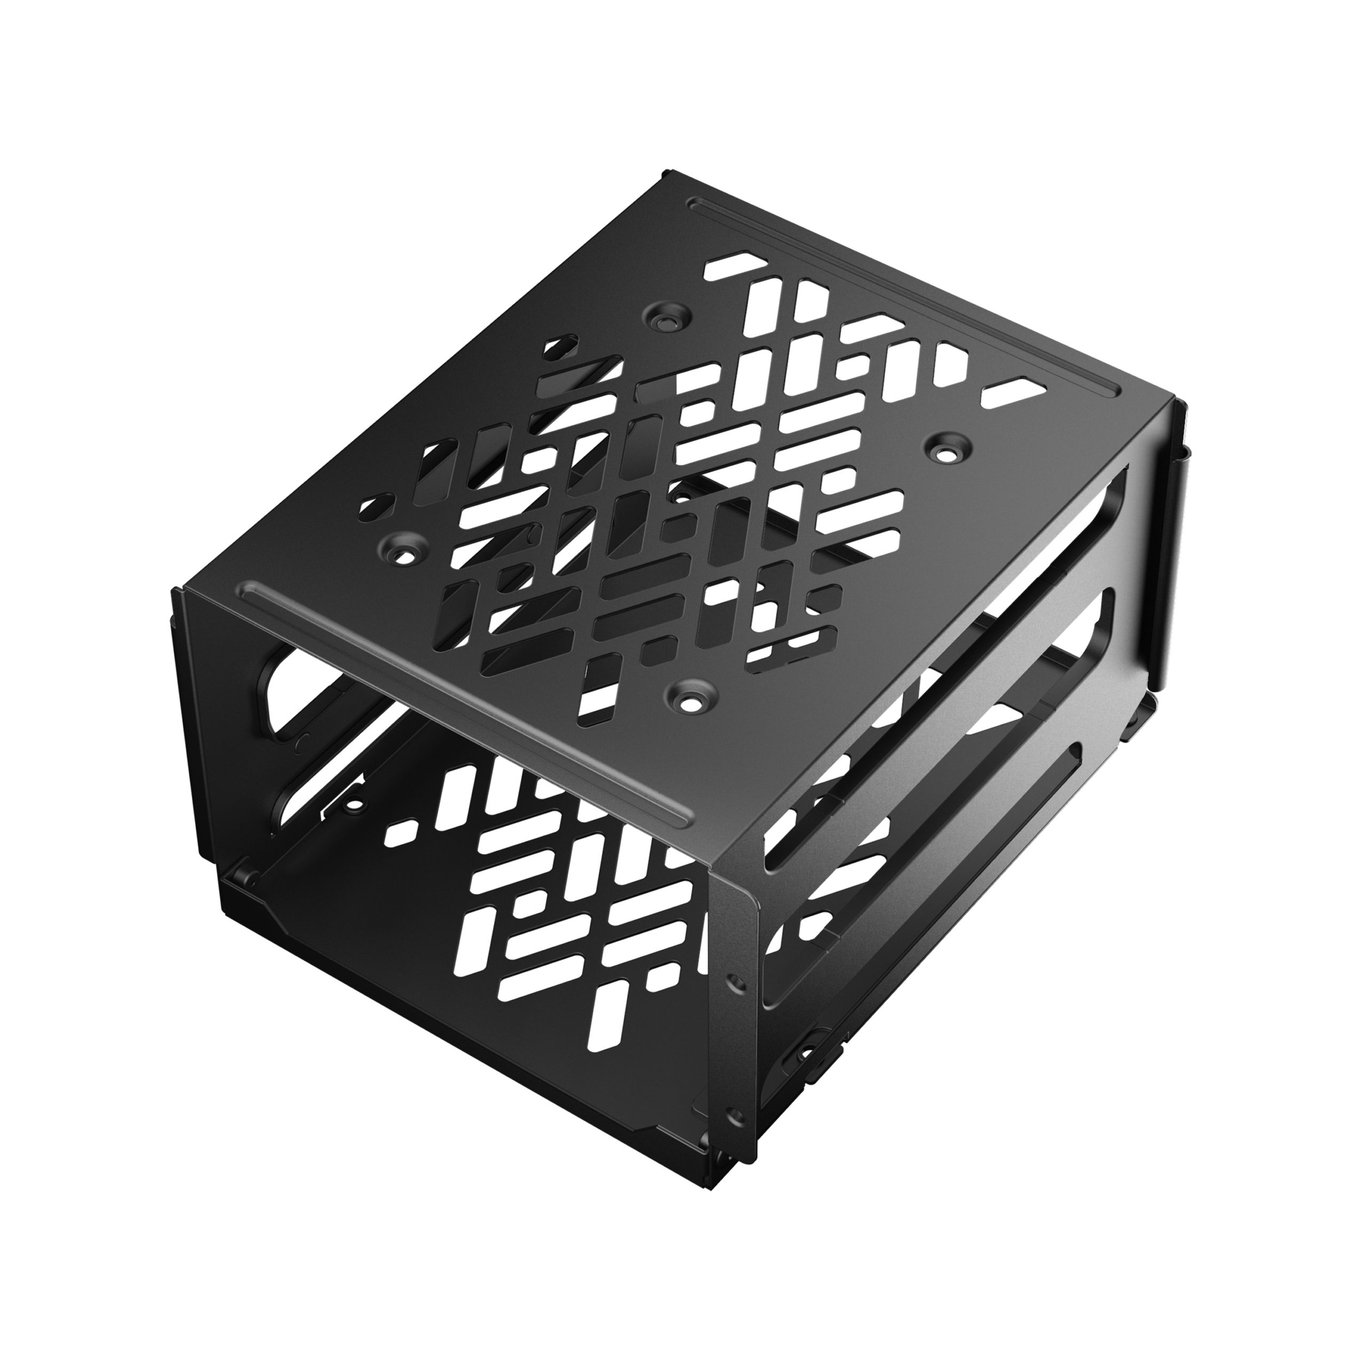 Fractal Design Hard Drive Cage Kit Type B For Define 7 or Meshify 2 Series